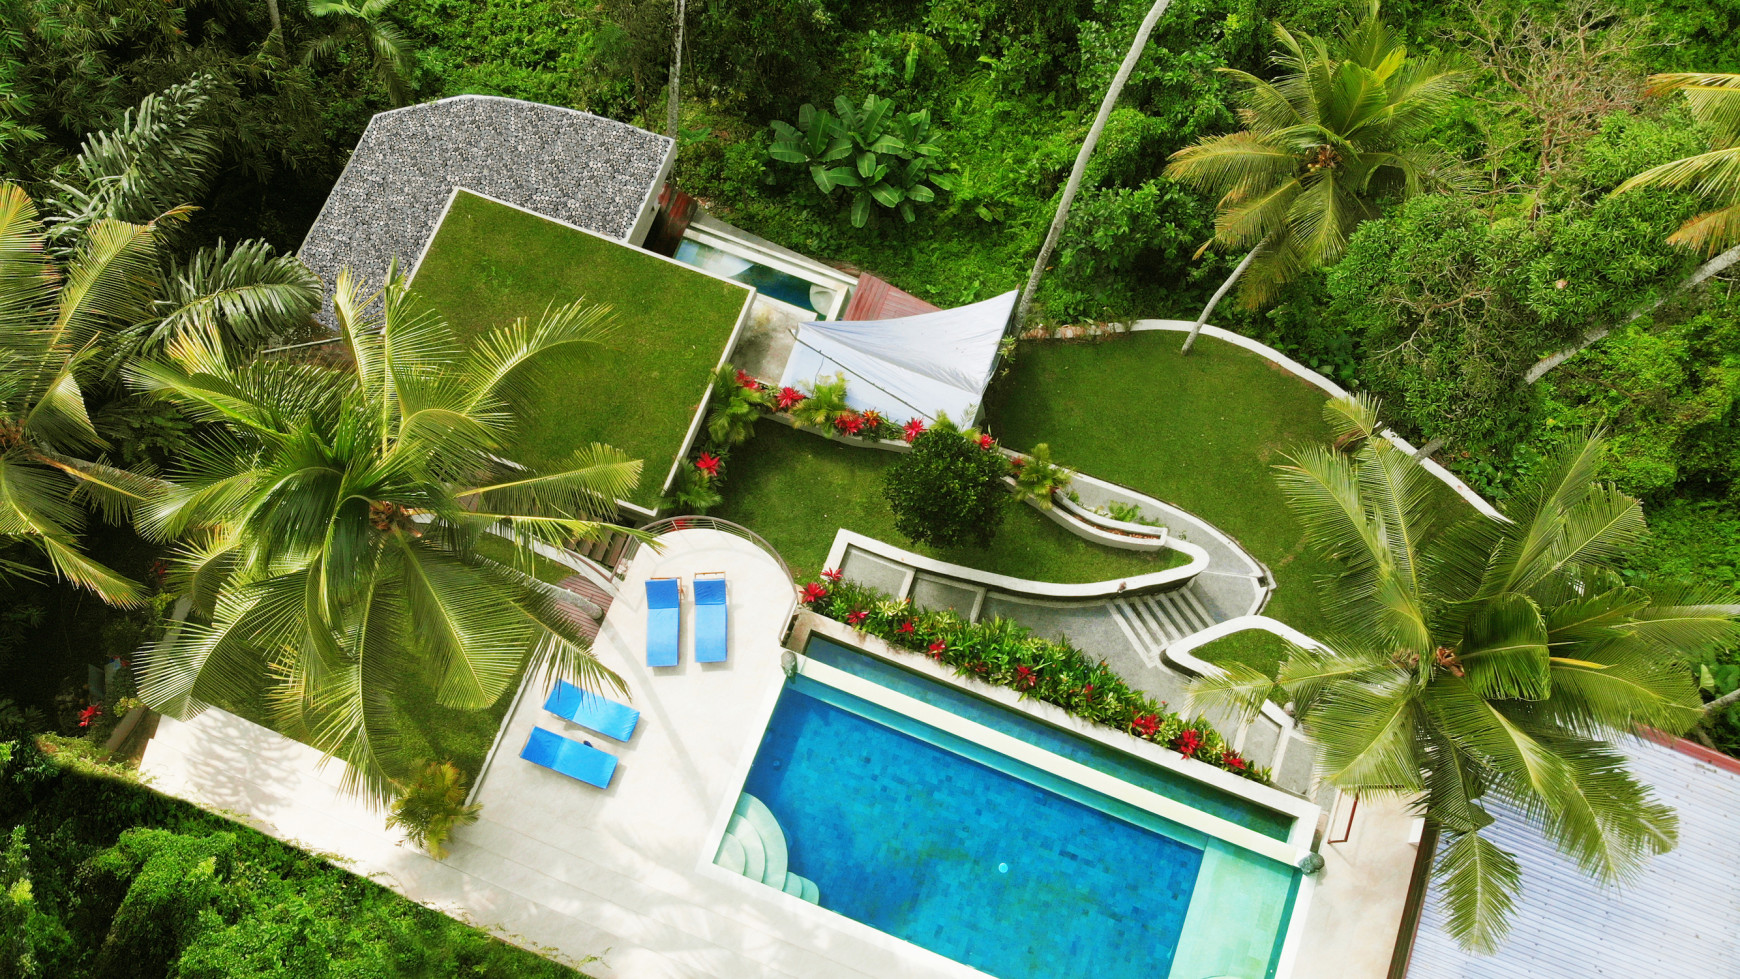 Amazing 6 Bedroom Villa on 1520 sq m of Leasehold Land with Ravine View 10 Minutes from Ubud Center